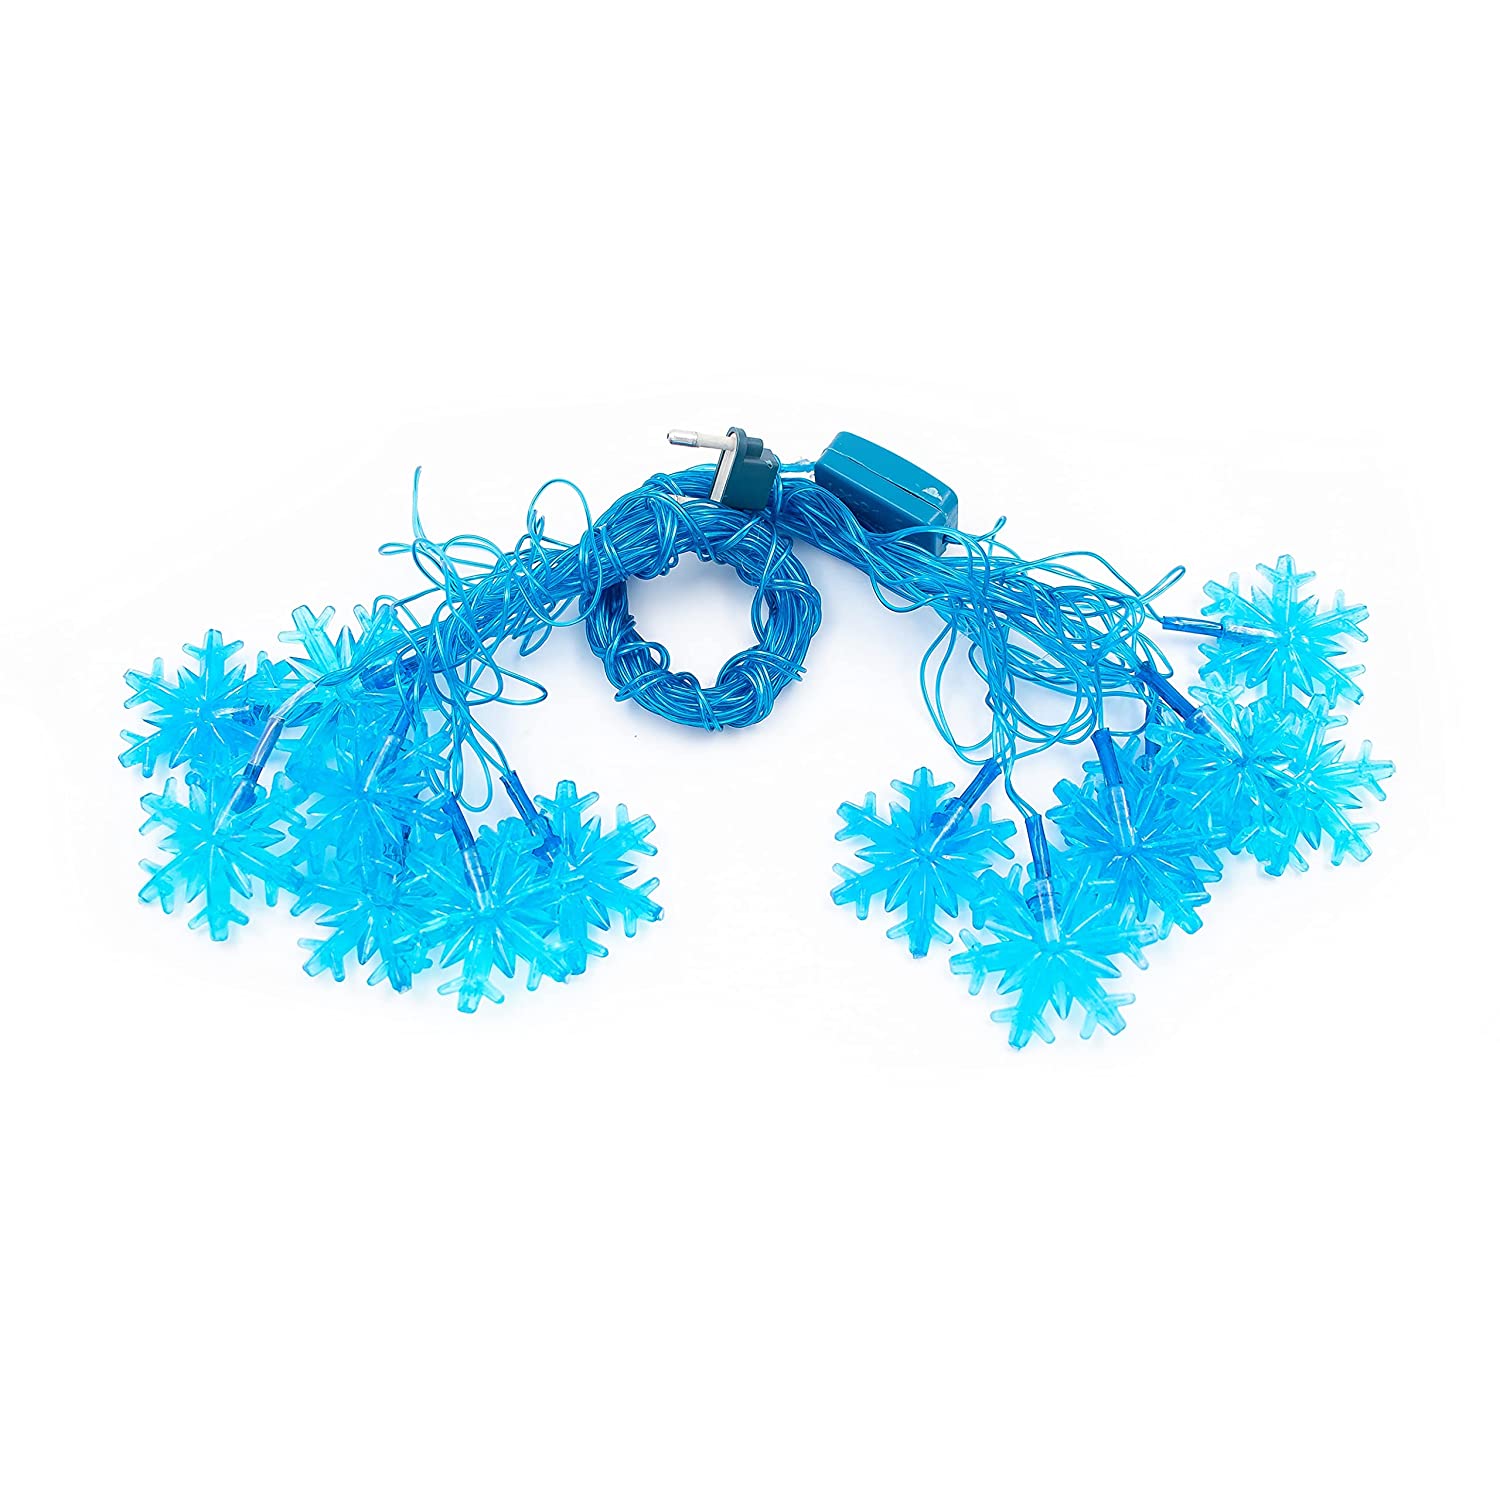 Christmas Lights 16 LEDs Snowflake Fairy String Light (Blue , AC Plug ) for Indoor & Outdoor Usage | Xmas | New Years | Party | Decoration - Homely Arts